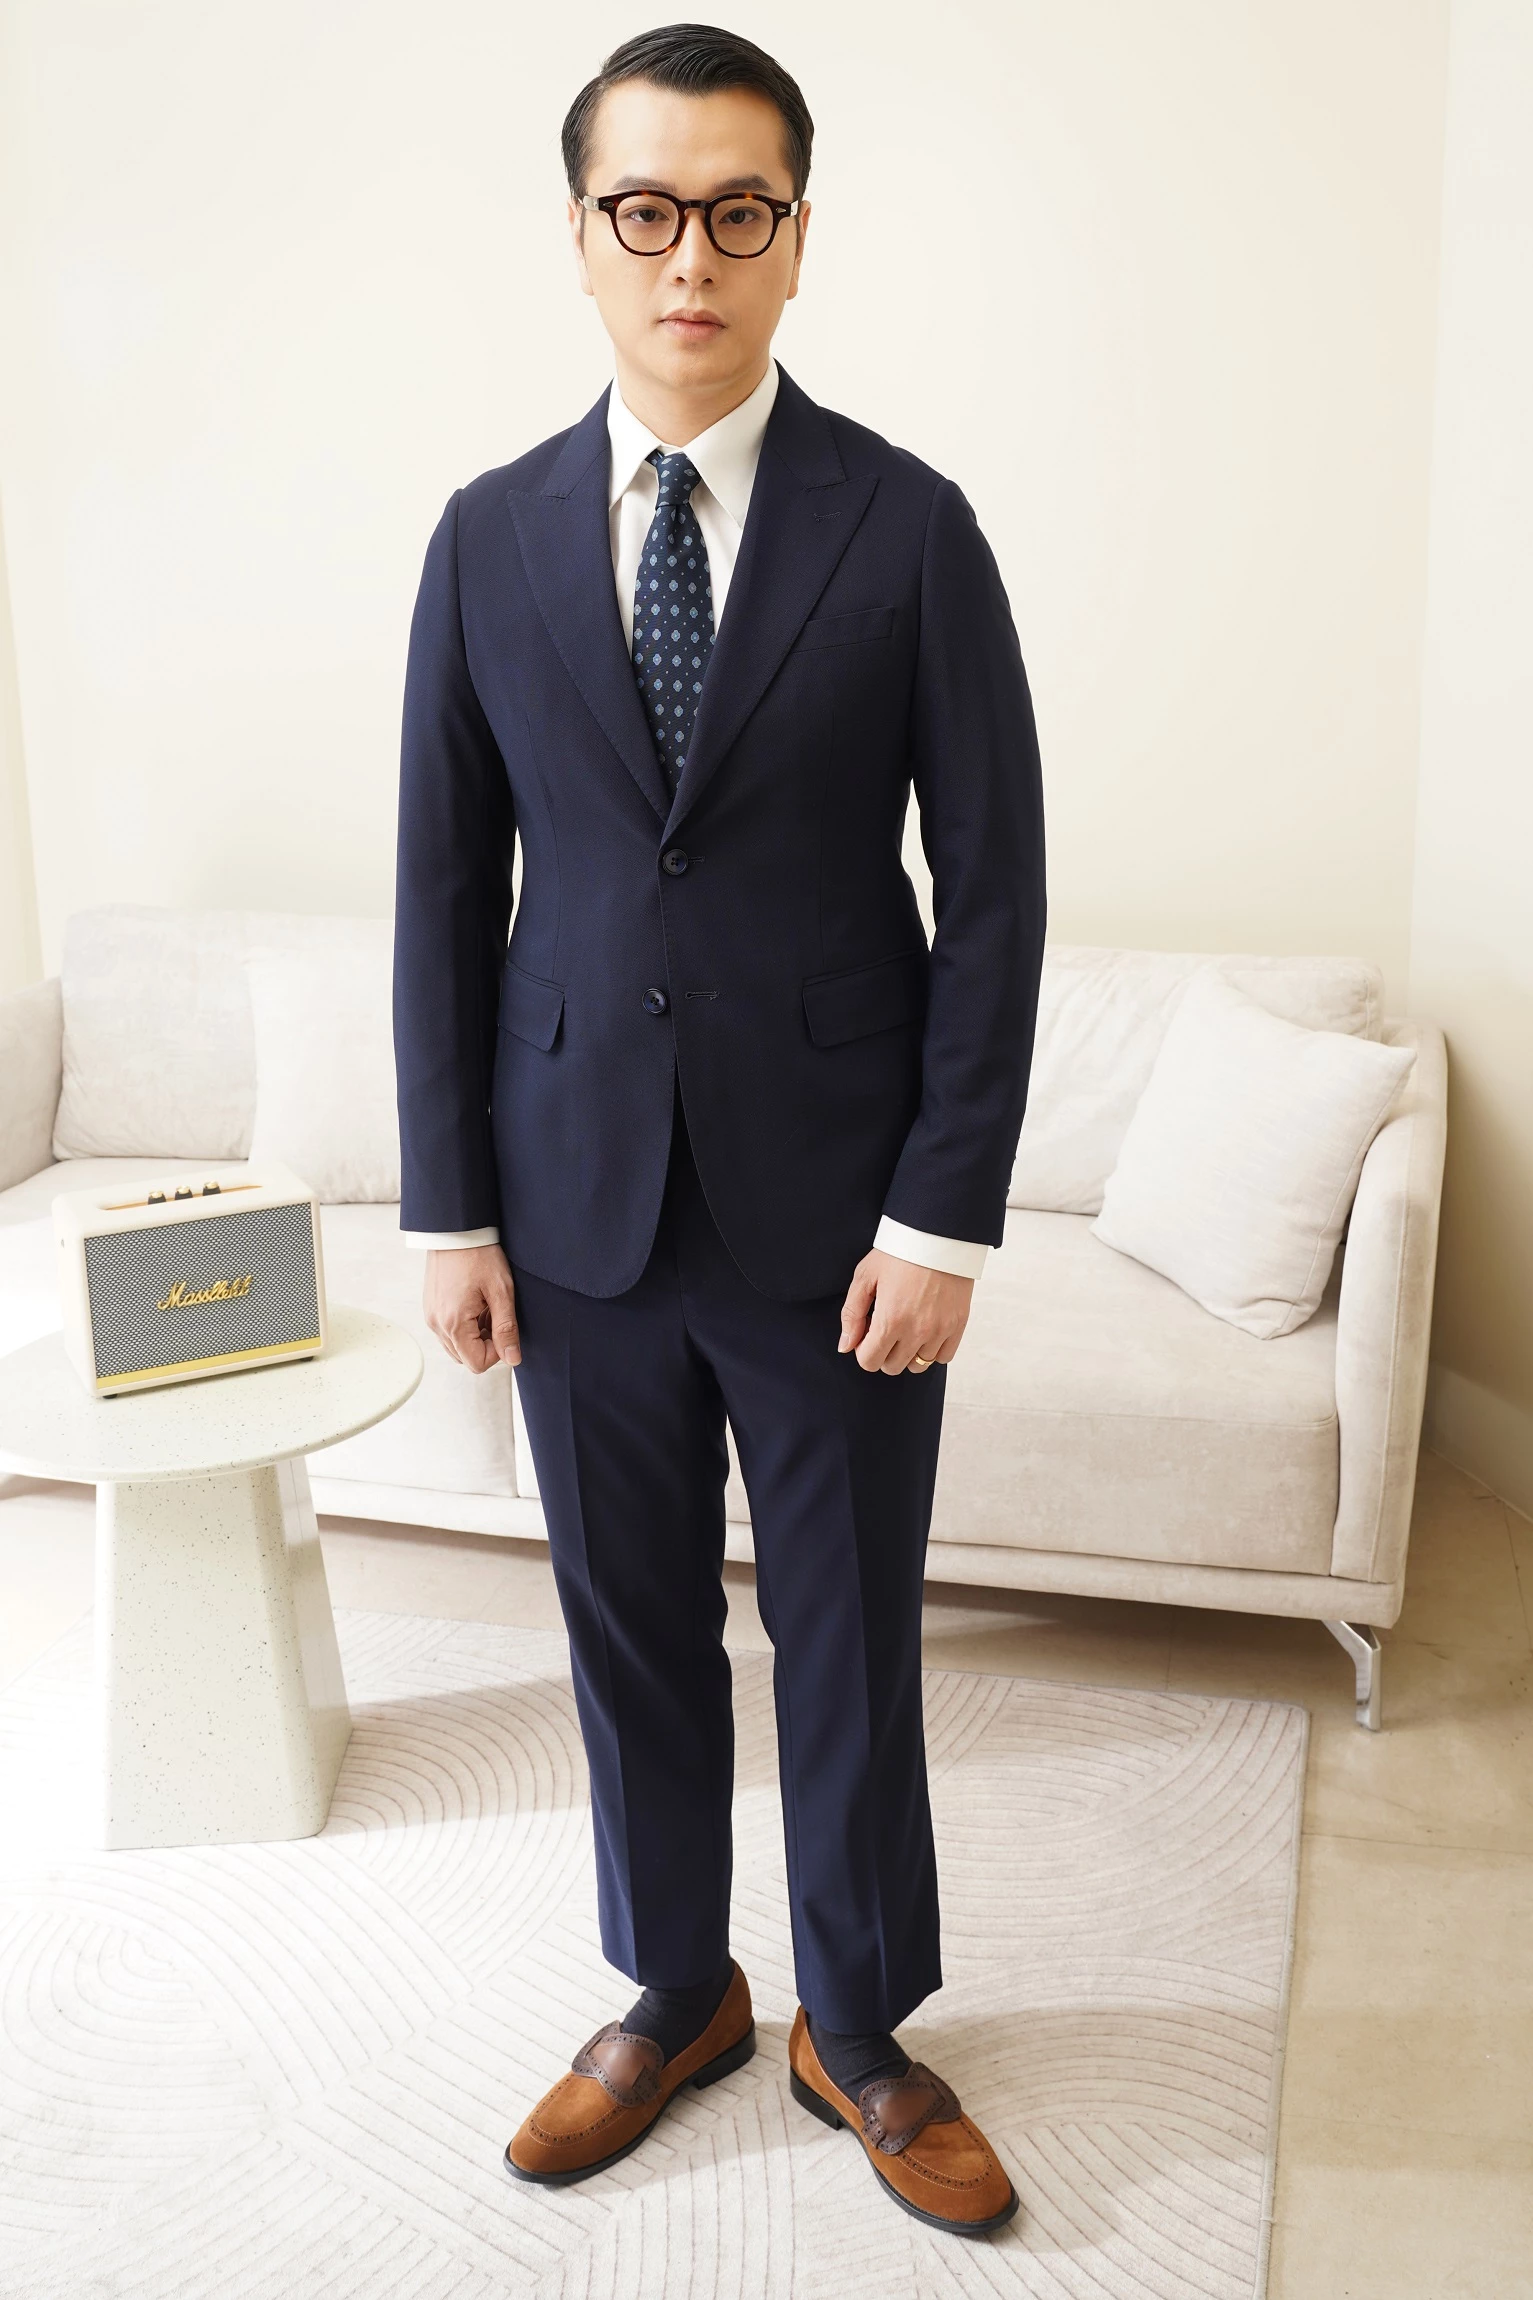 Suit xanh navy cổ vếch